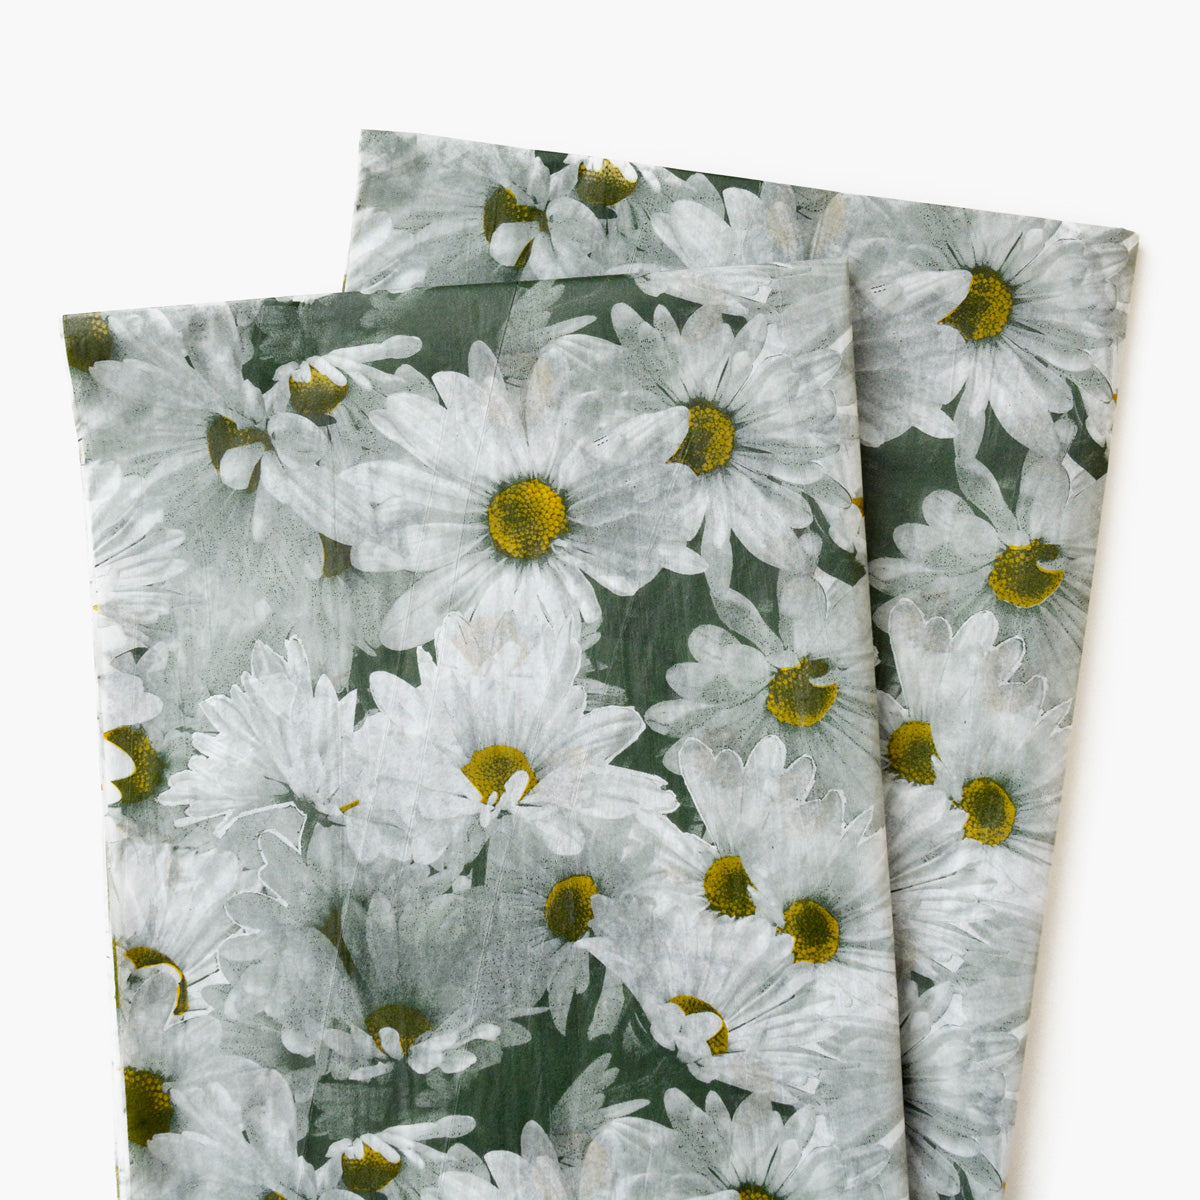 Daisies Tissue Paper - Daisy Pattern Tissue Paper, Christmas Gift Wrapping Wrap Paper, Groovy Daisy Paper, Craft Supplies, Daisy Paper GenWoo Shop